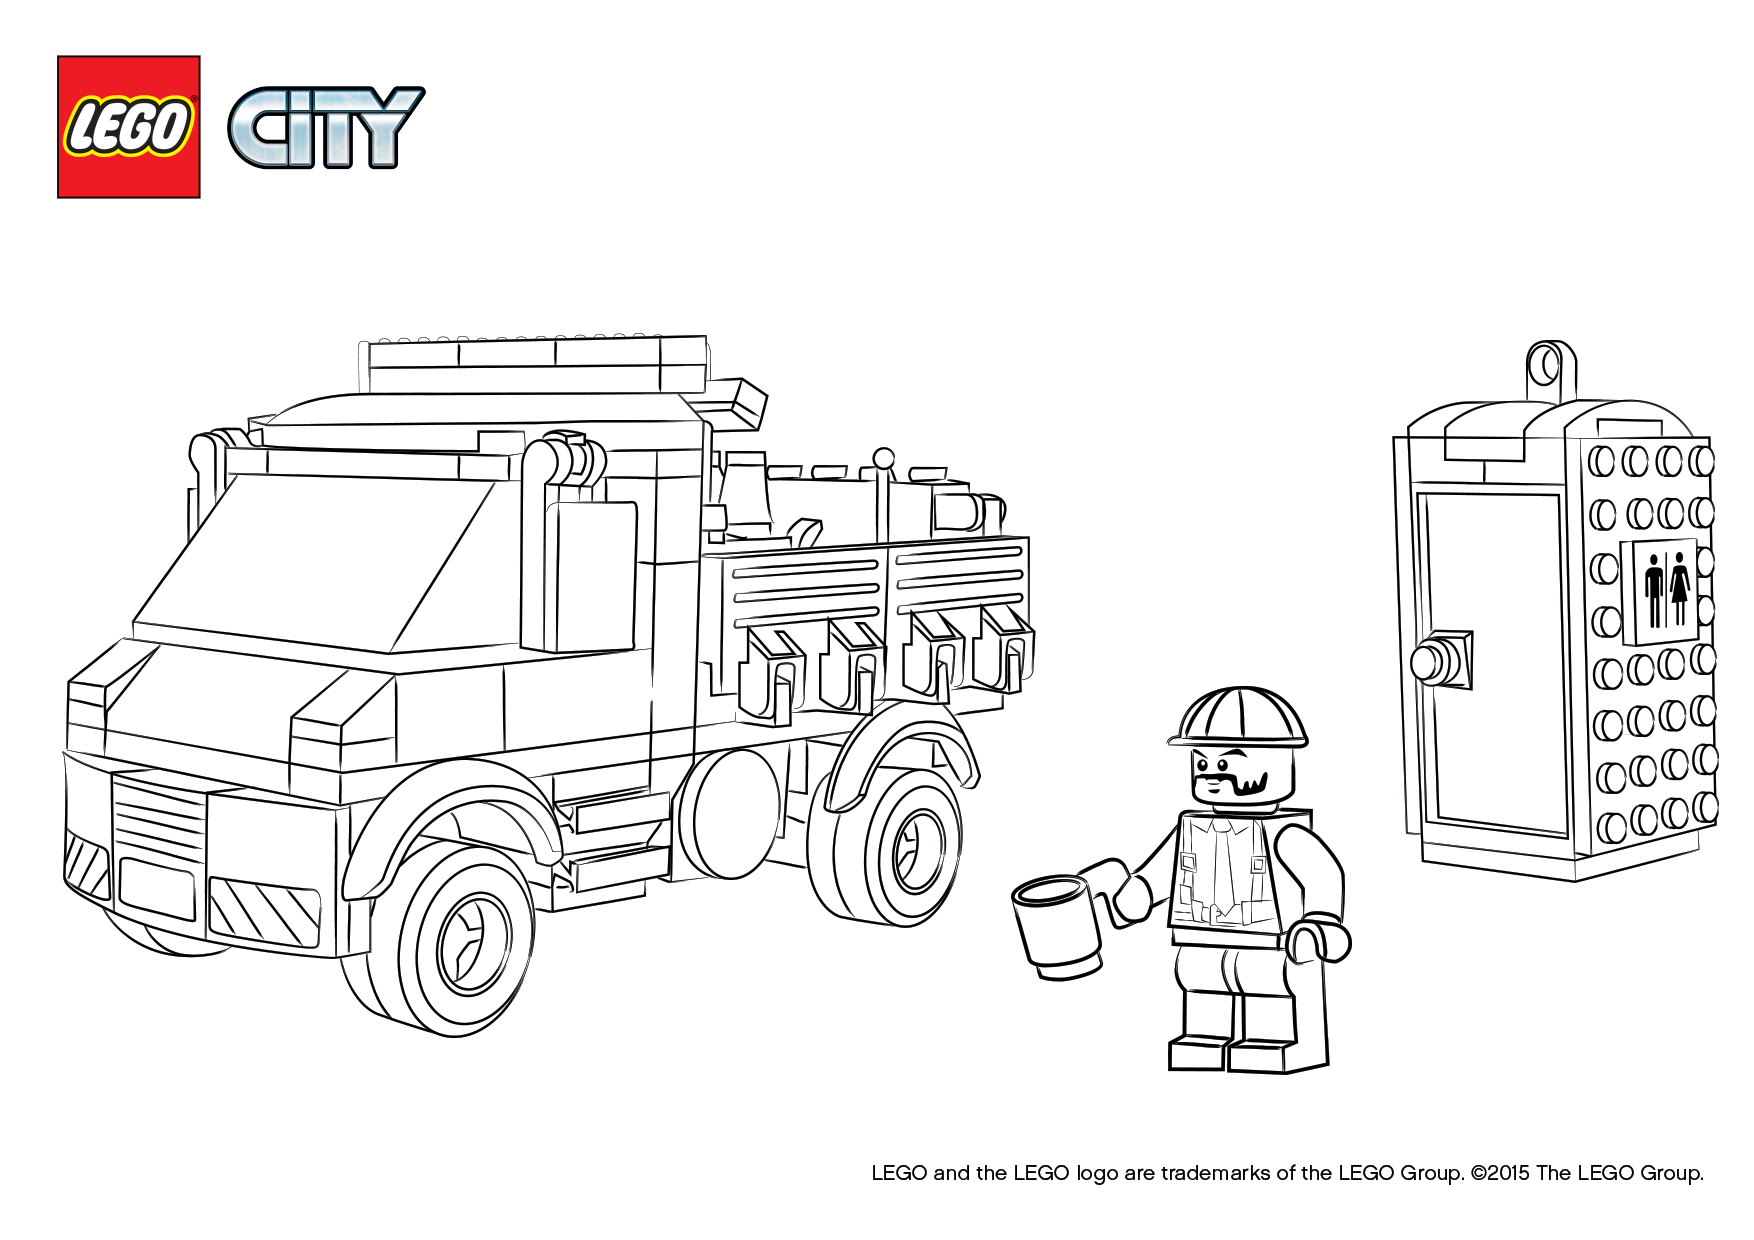 60073 Service Truck - Coloring Pages - LEGO® City - LEGO.com US